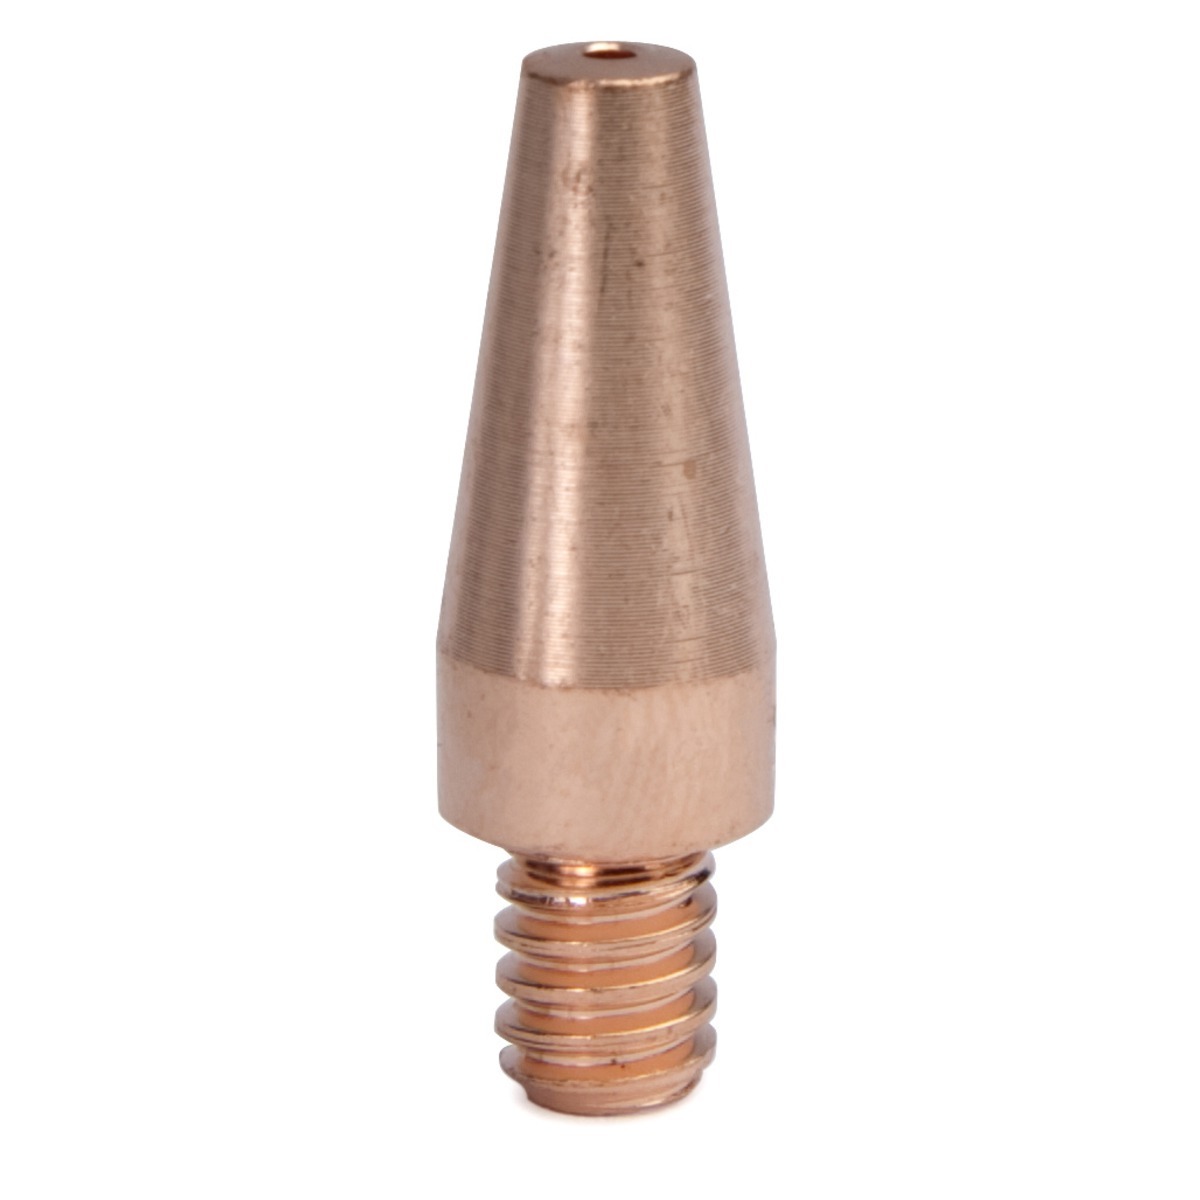 Lincoln Electric KP2745-052 Copper Plus Contact Tip 550A .052 in 10 pack 